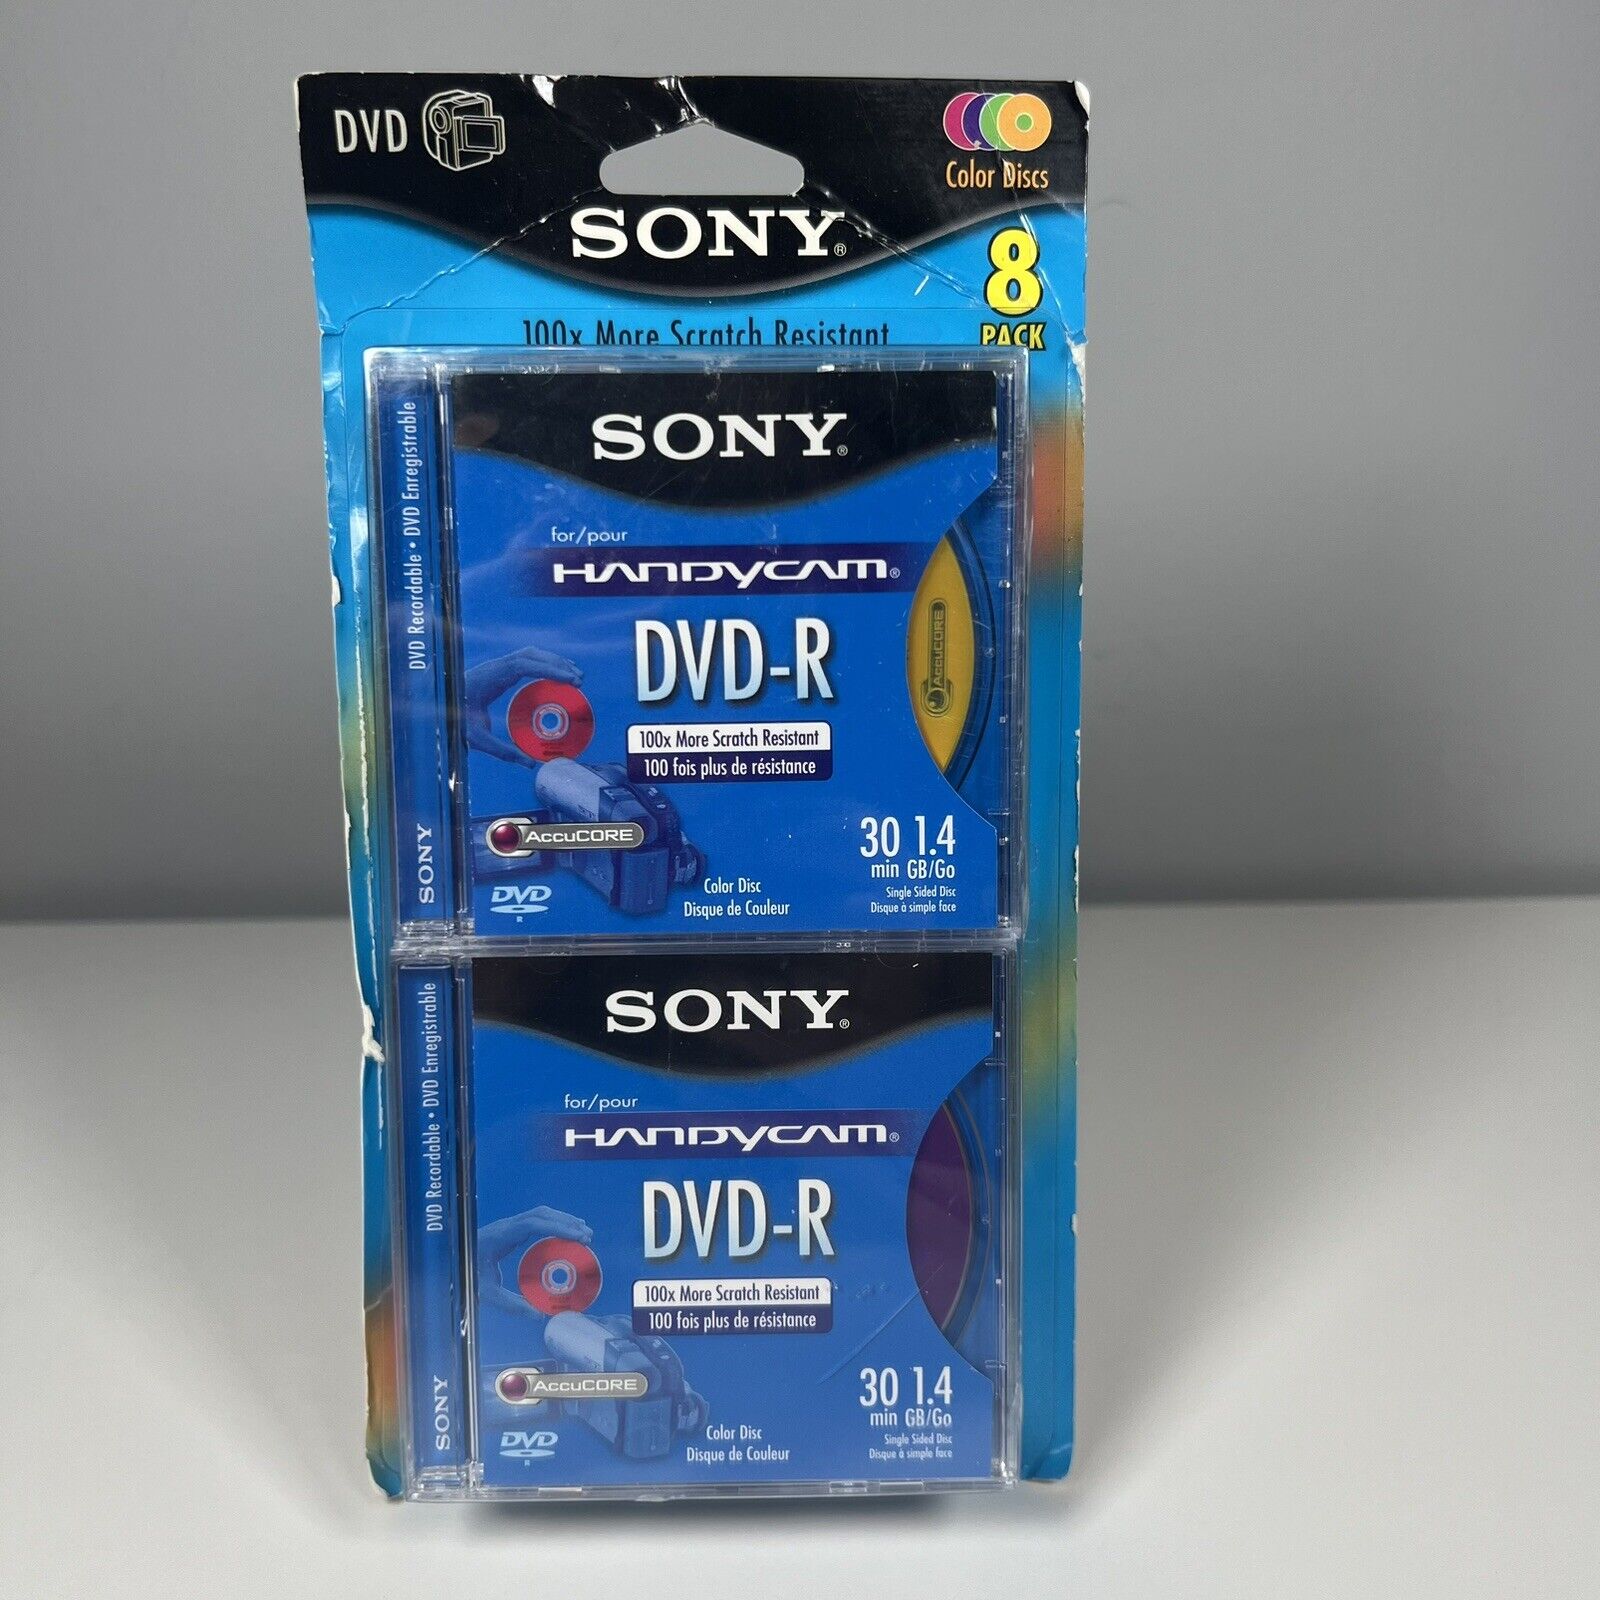 Sony Handycam DVD-R Recordable Disc 8 Pack New 2007 Old Stock 30min Color Discs